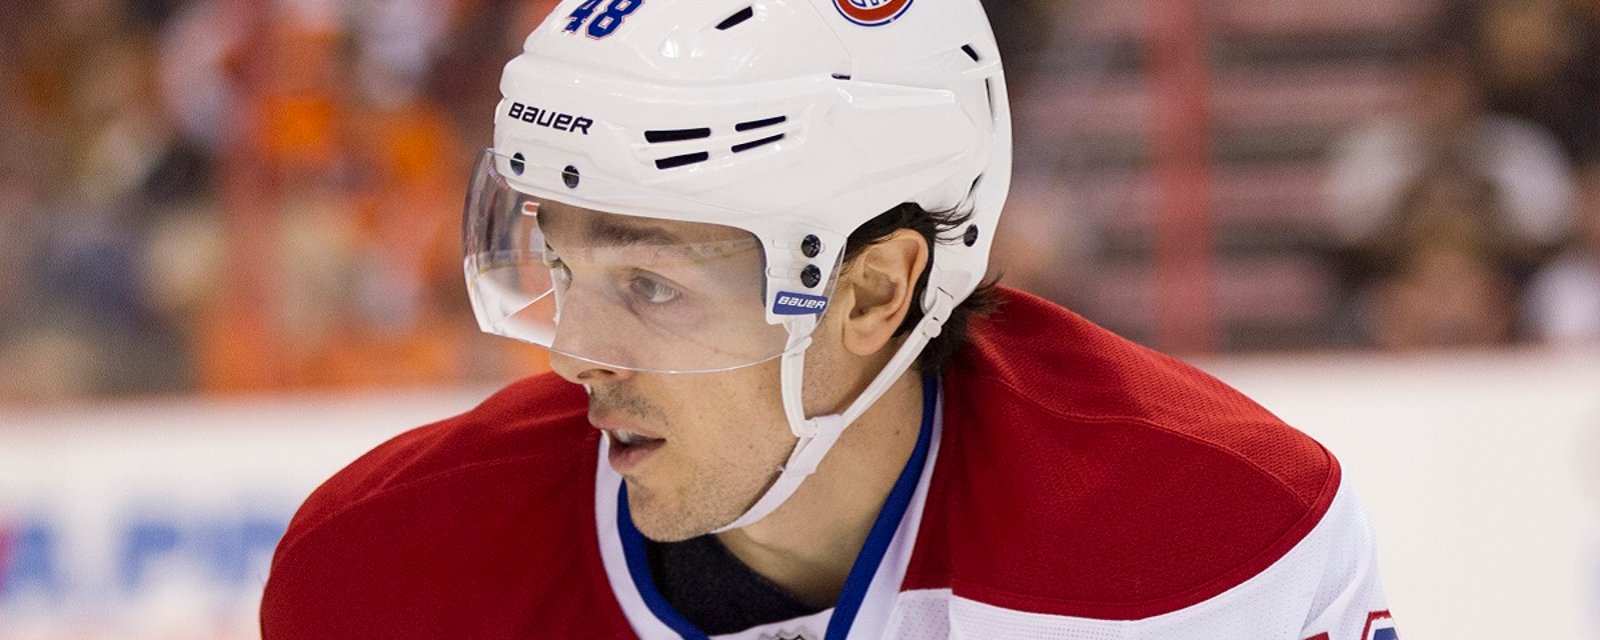 Breaking: Daniel Briere reveals shocking story about NHL head coach in new book.